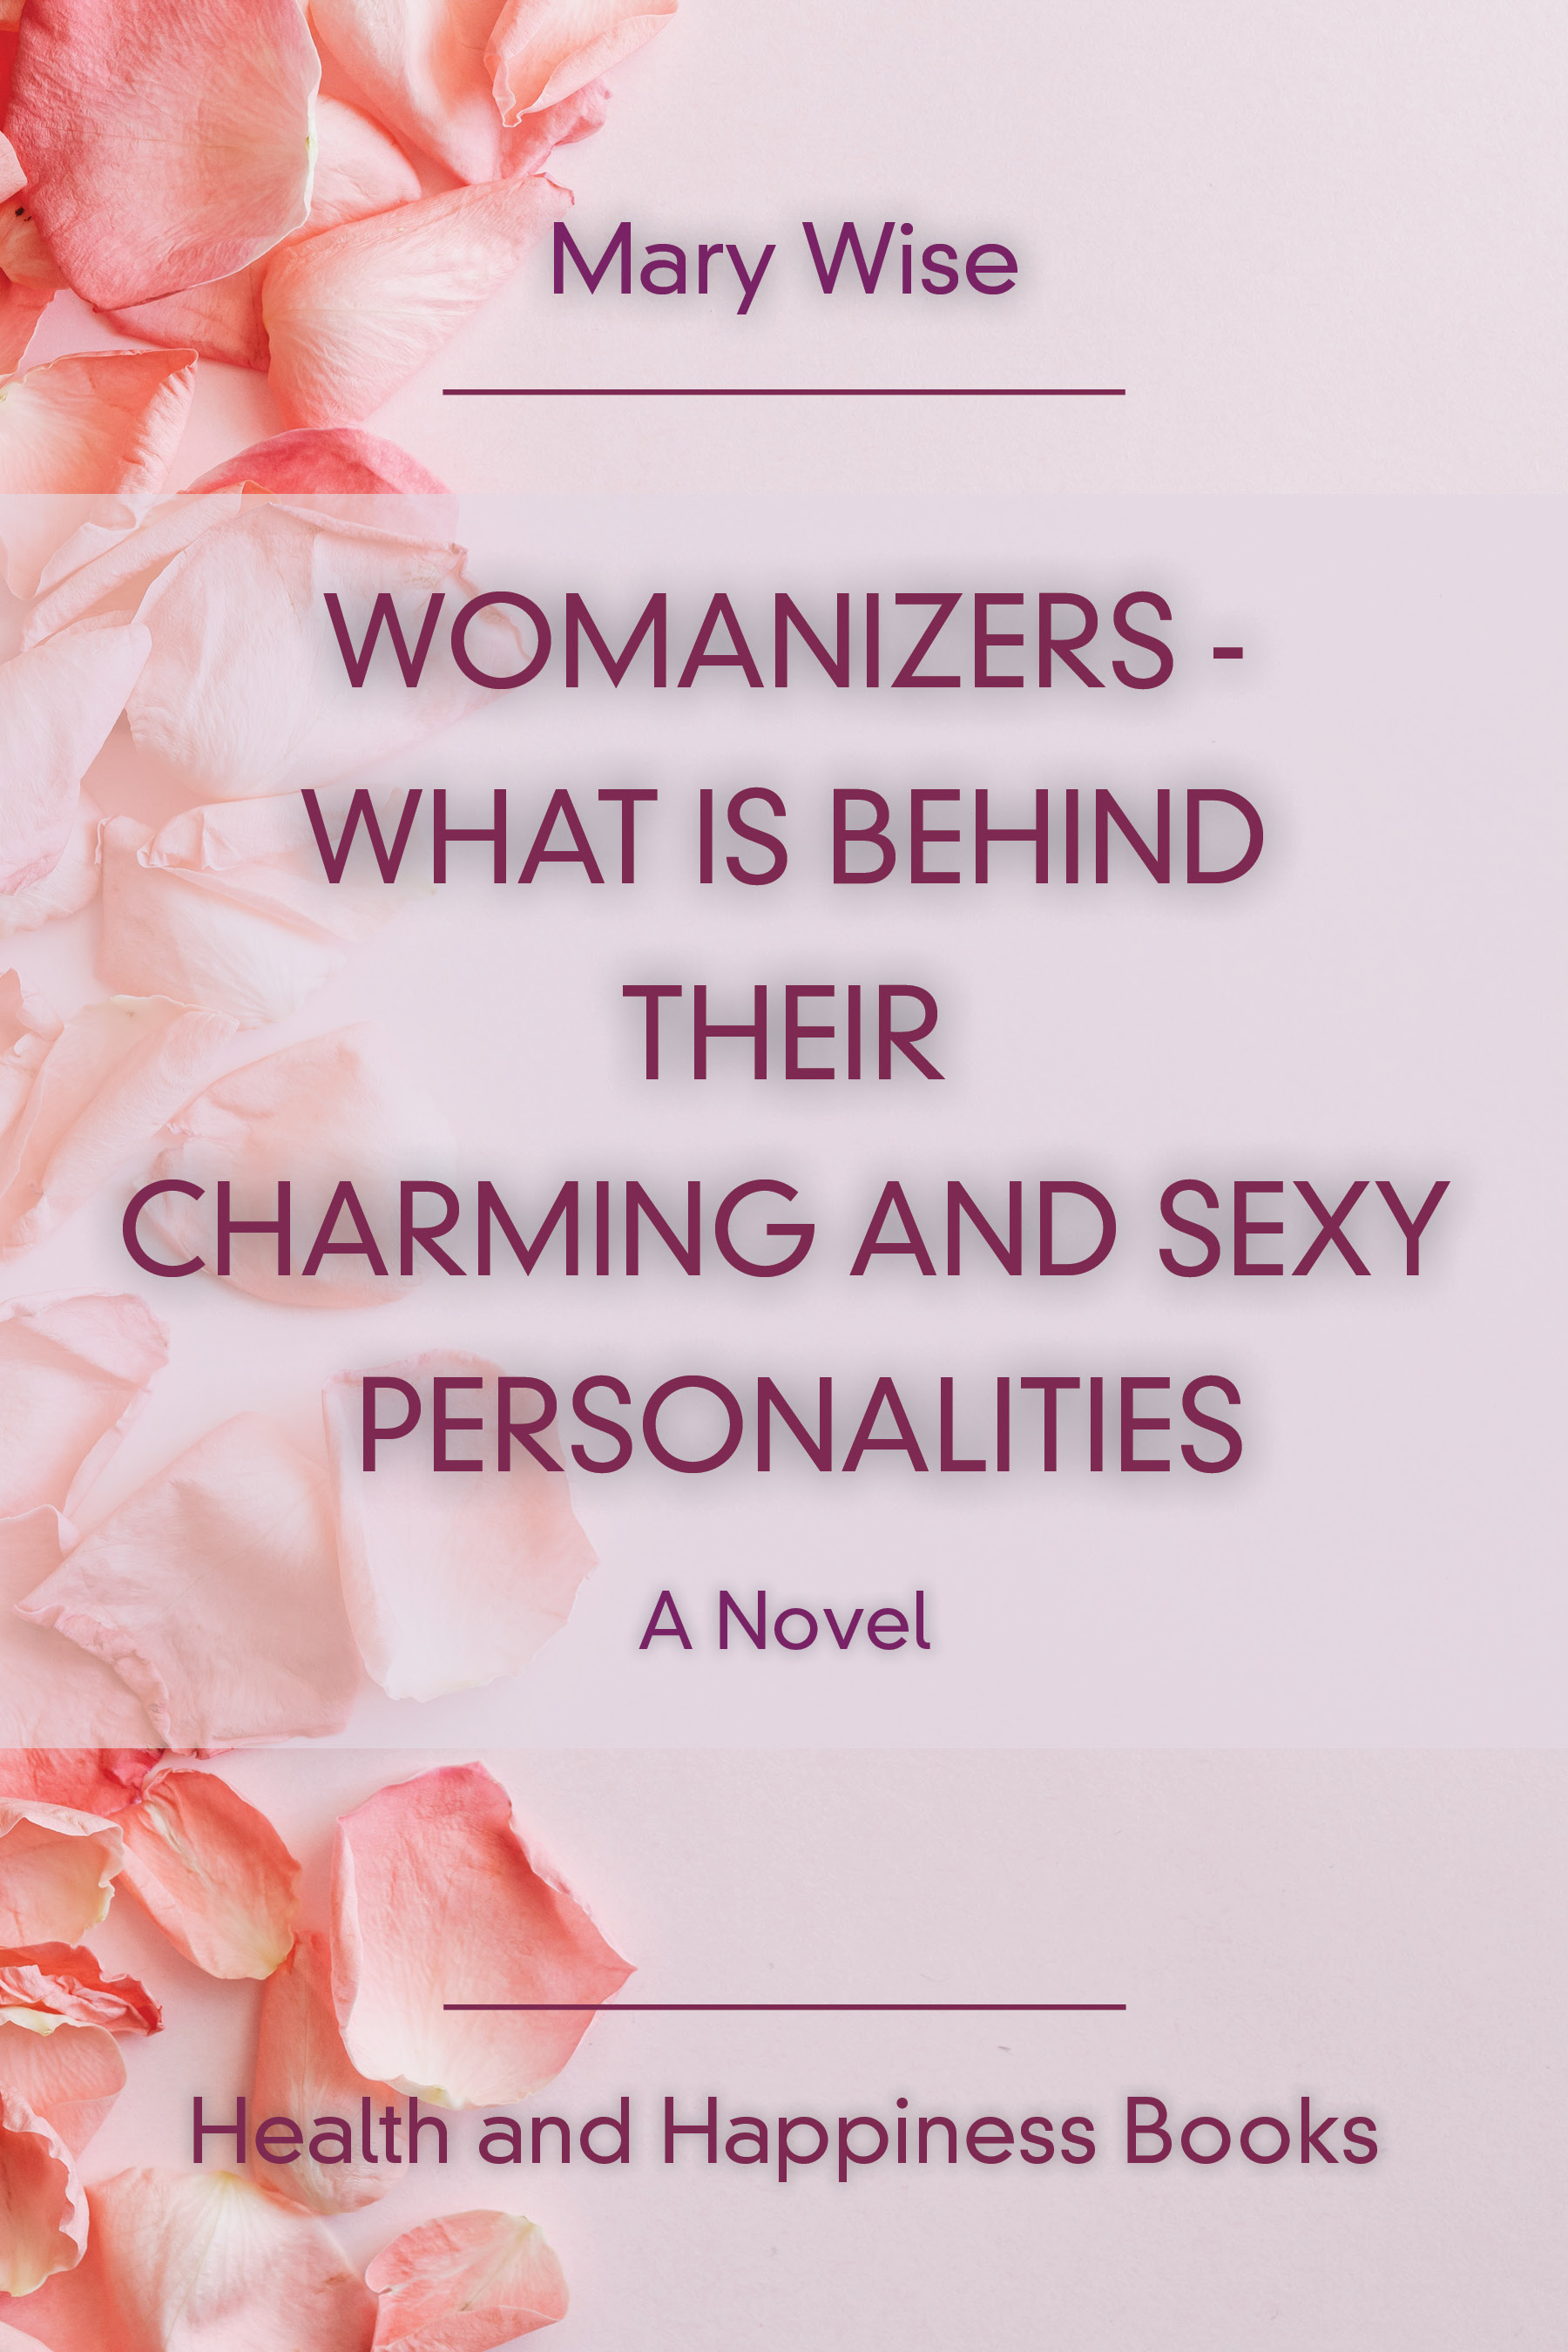 Womanizers - What is behind Their Charming and sexy Personalities